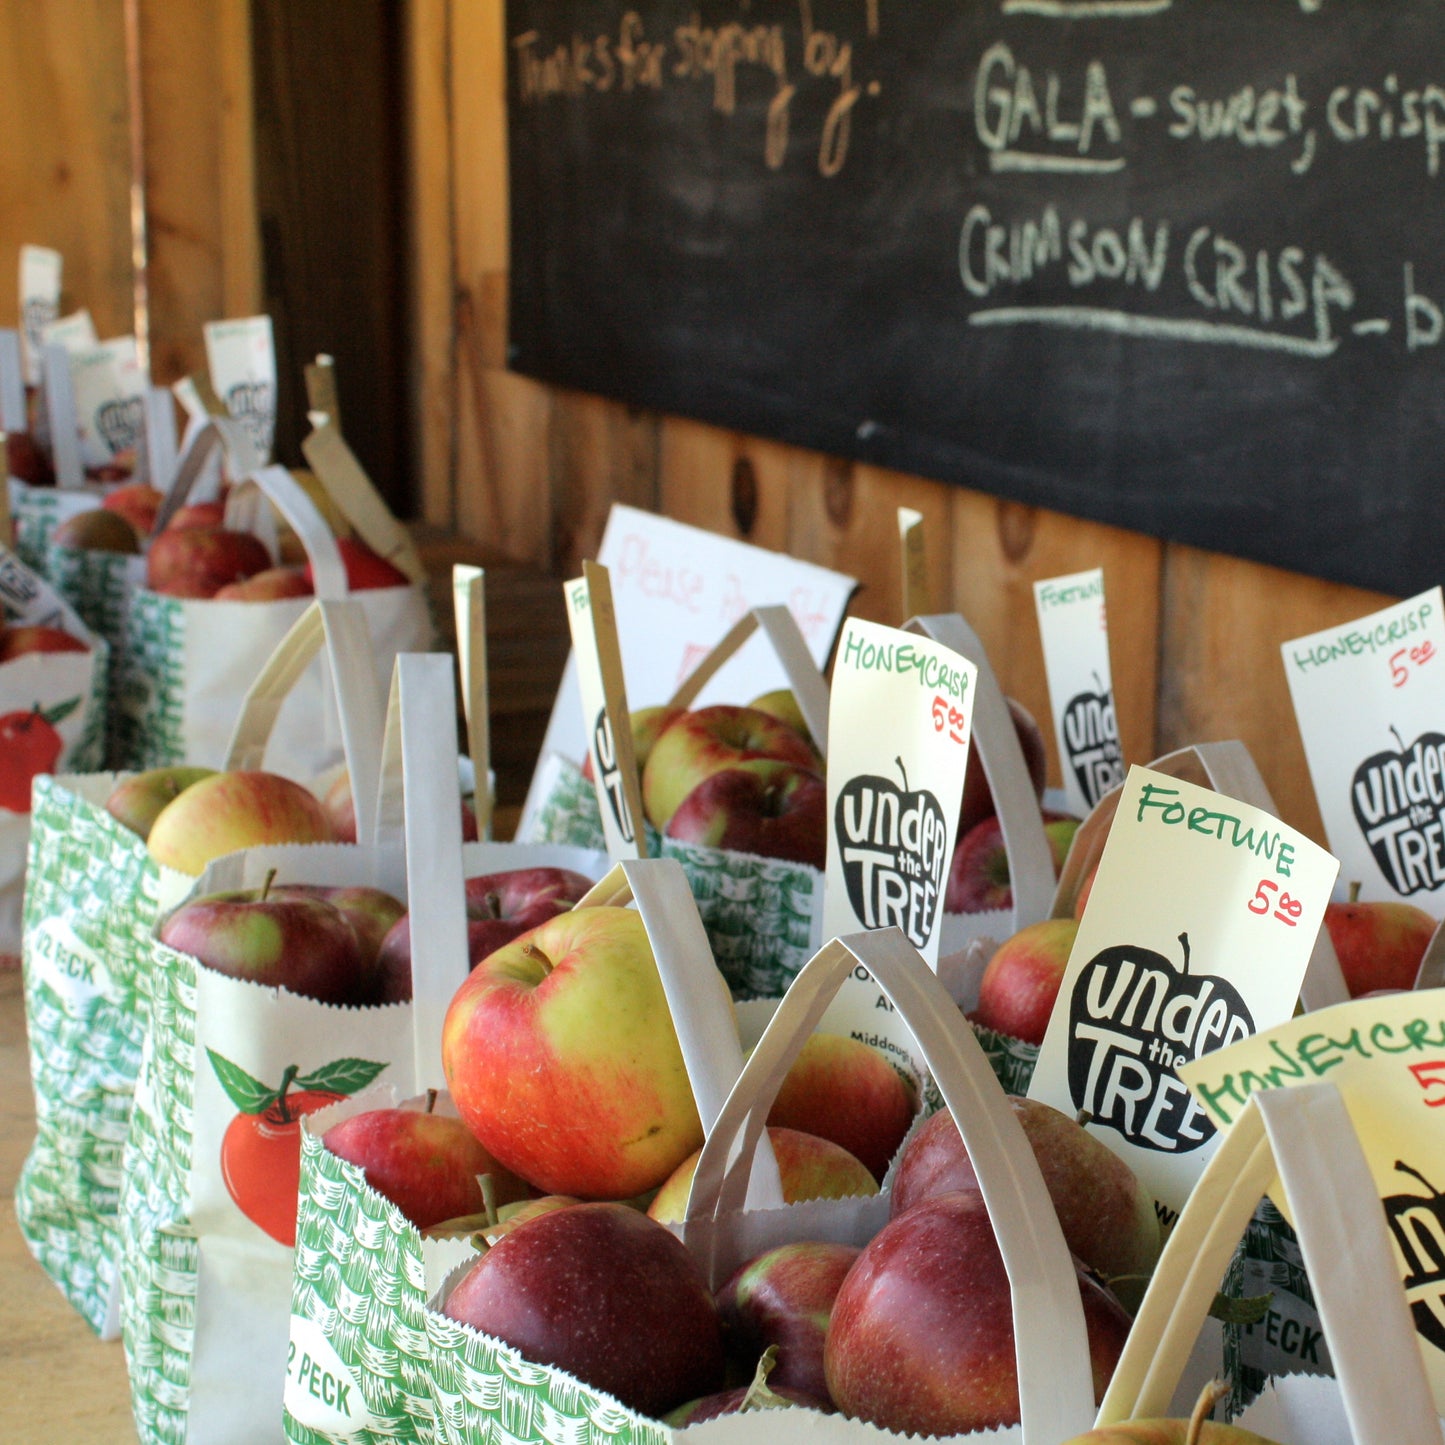 The farmstand is open and full of apples!